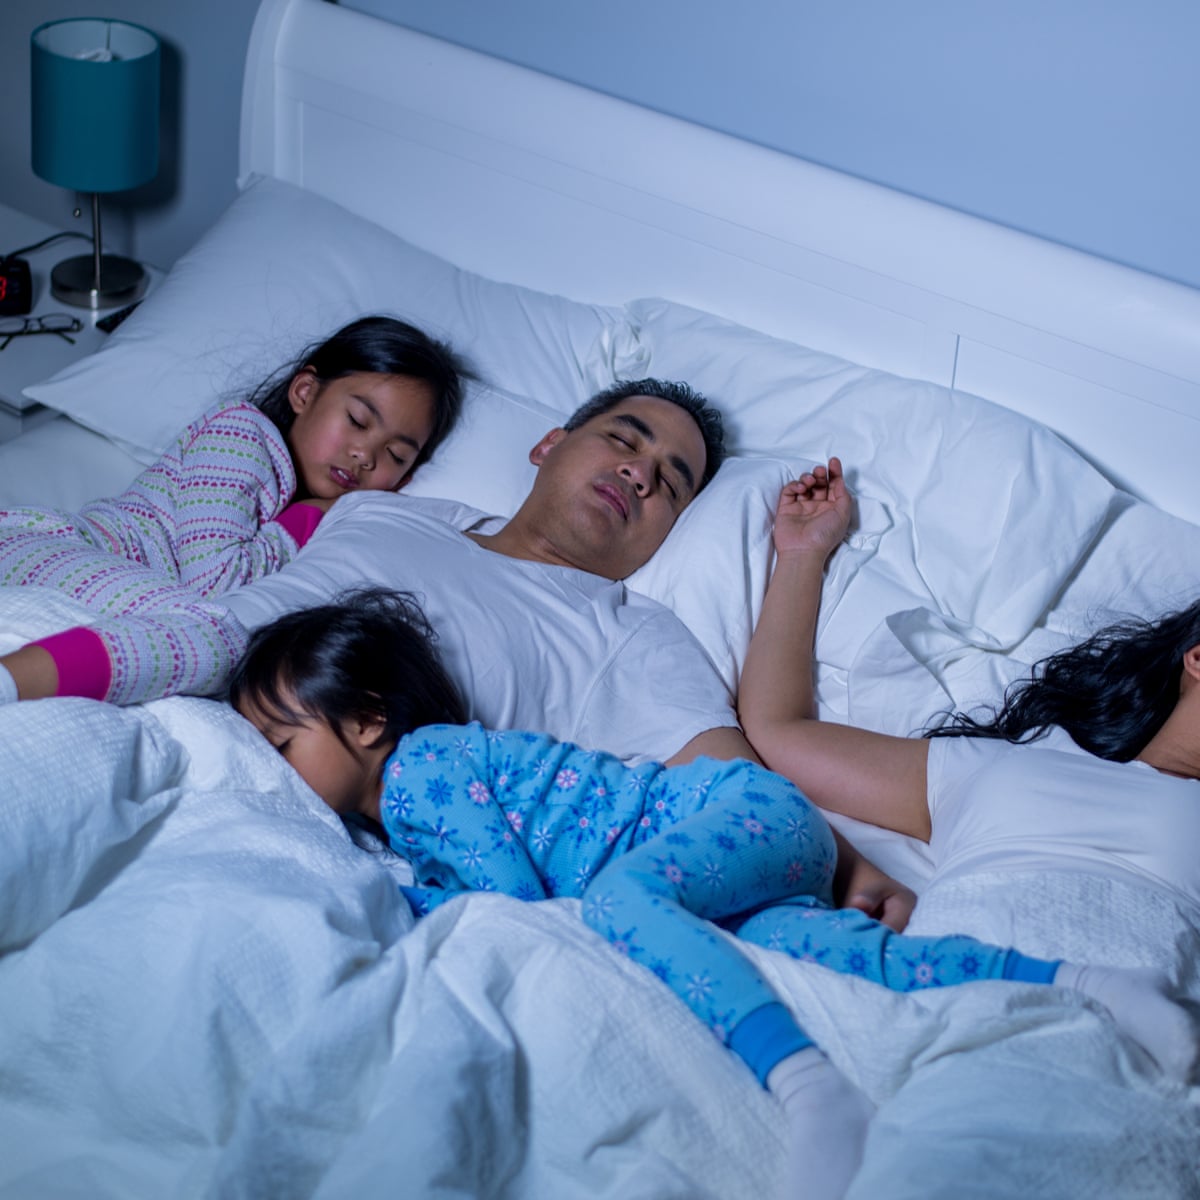 Co-sleeping with children has biological benefits – but it's not